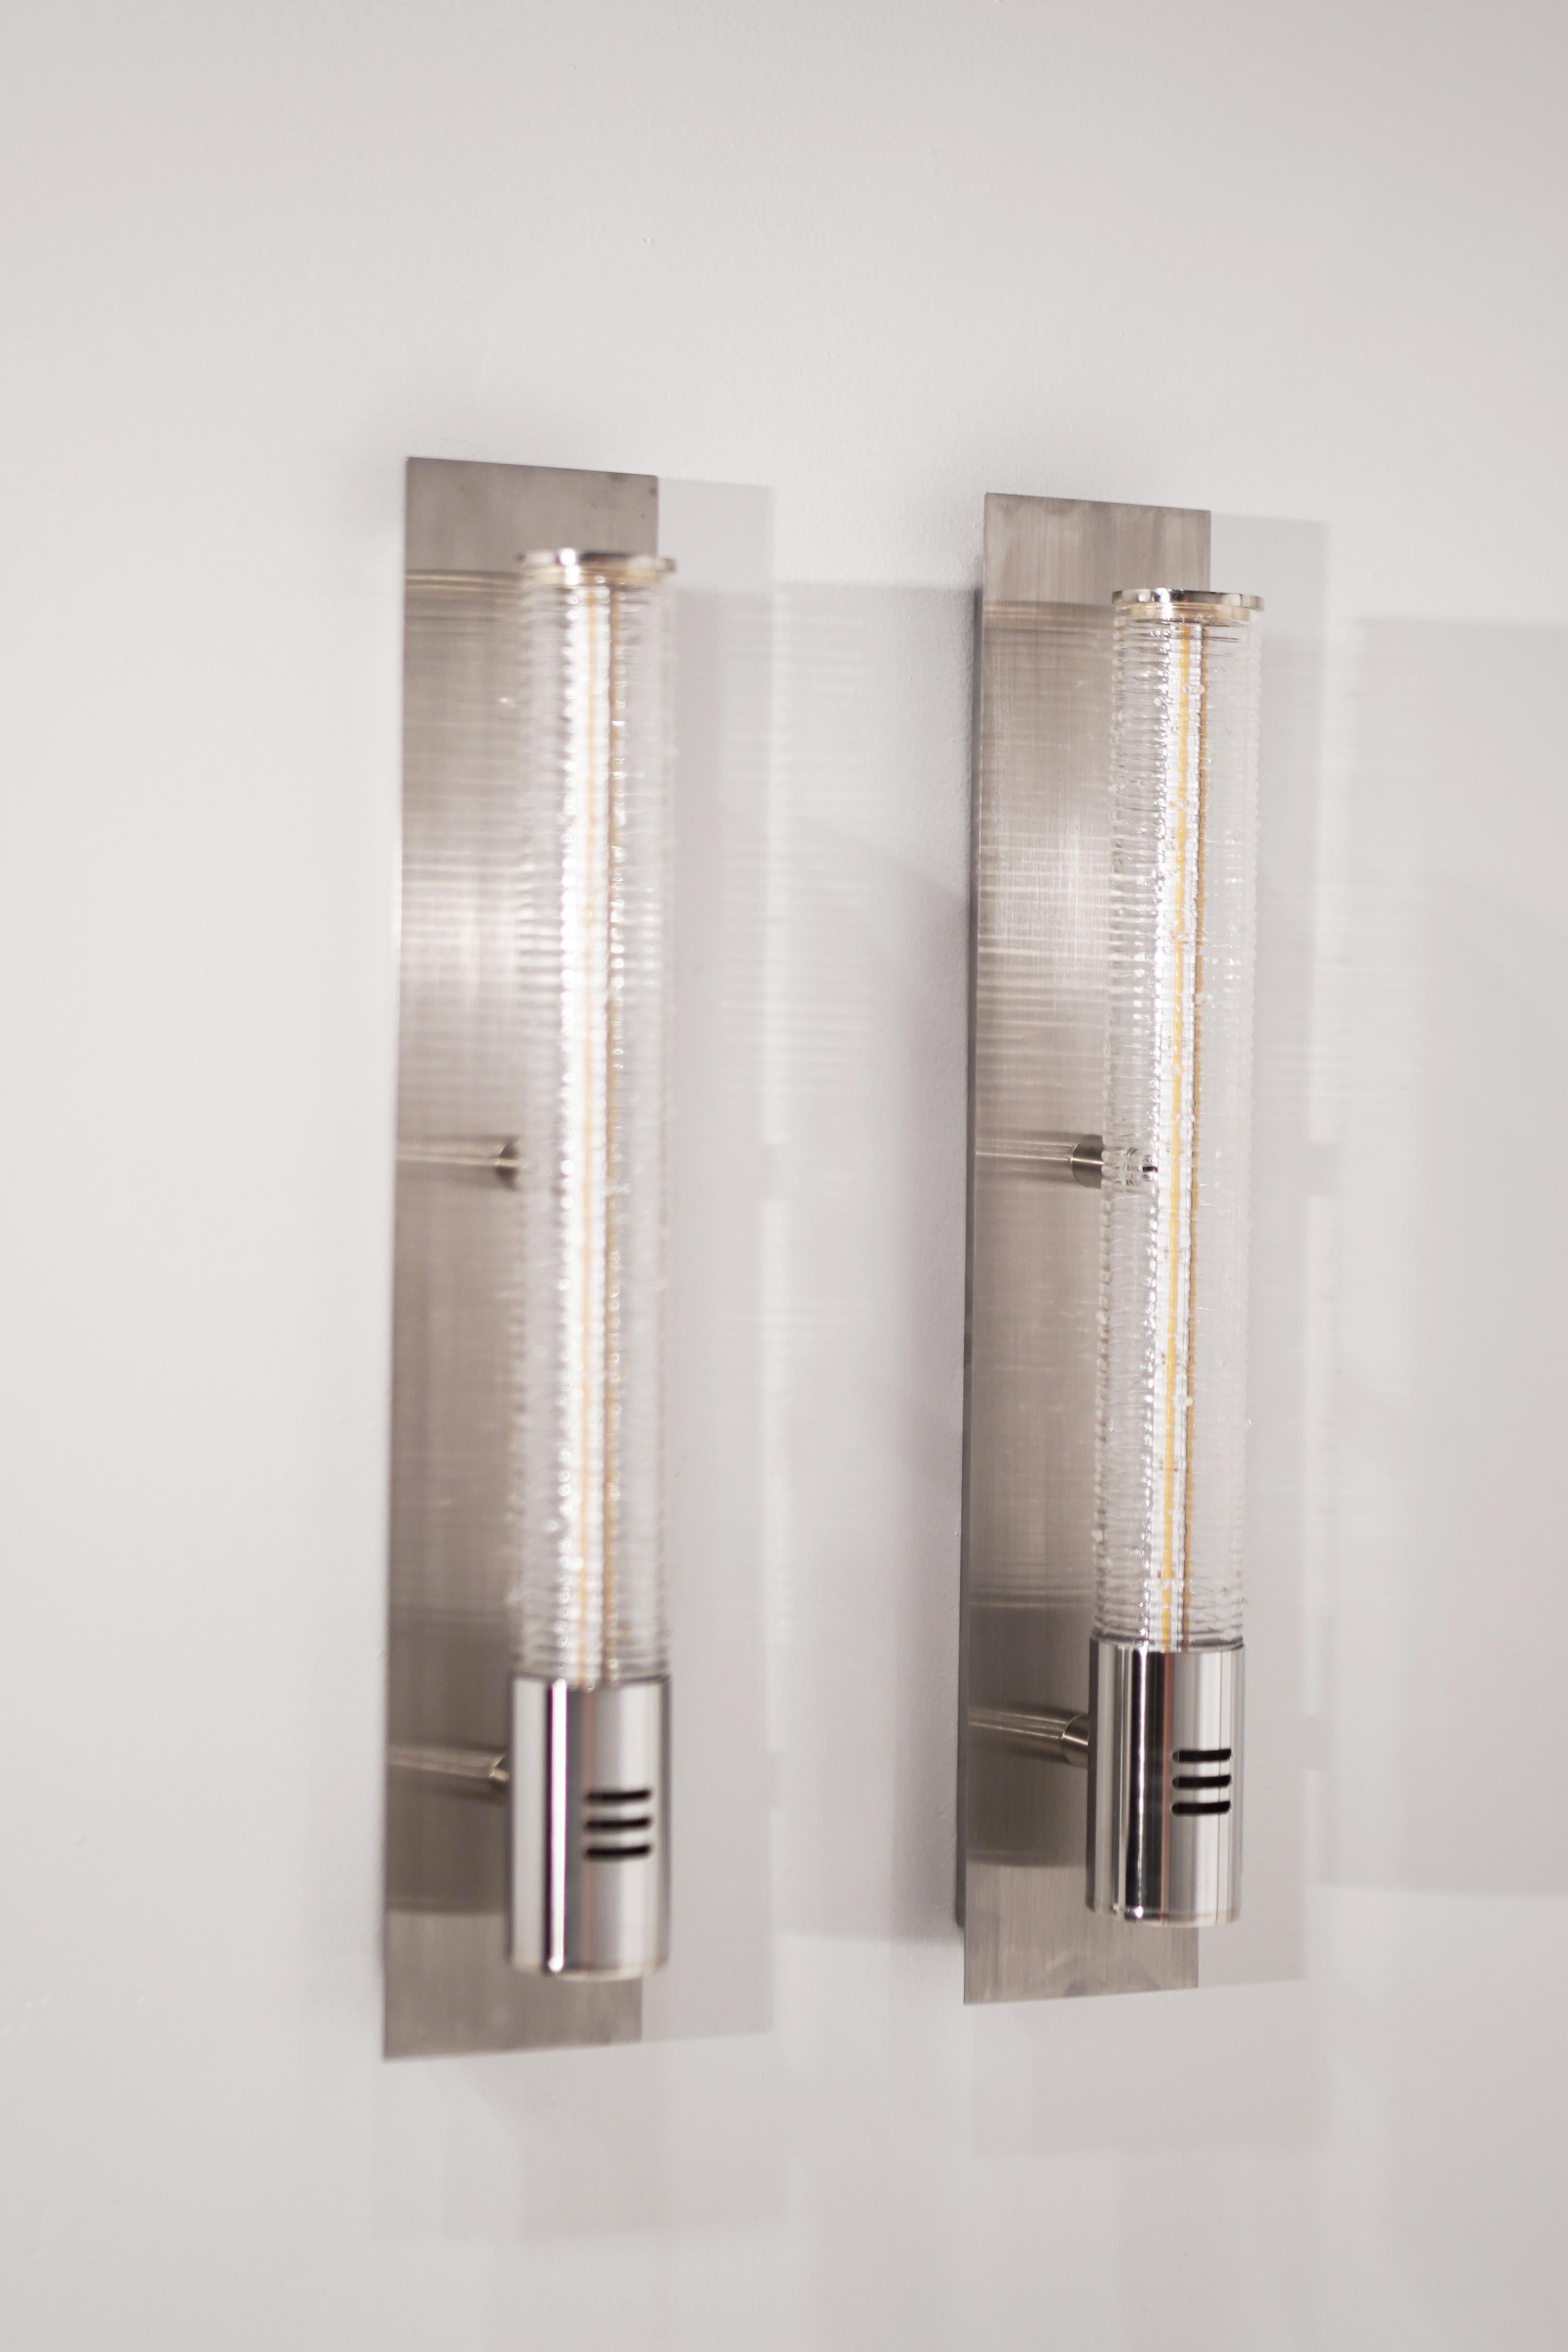 The Tamar Wand blown glass sconces come affixed to steel connectors at the bottom of the plate. The top of the wand is finished with a circular plate. The sleek features of this design allow for a variety of applications.

Hardware is available in